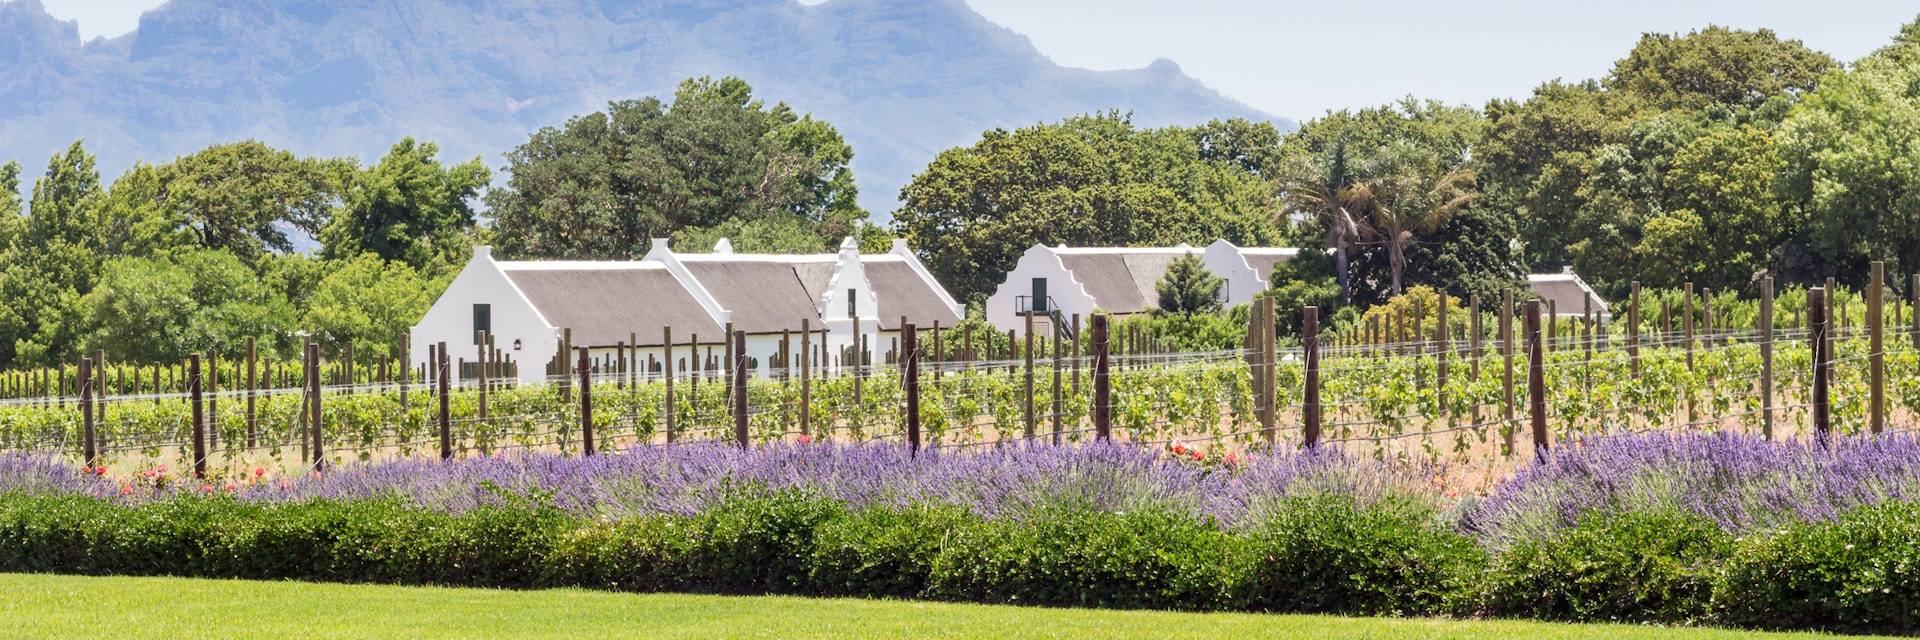 Wine farm in Franschhoek, Western Cape South Africa - Image of La Motte wine estate with young grape vines, roses and lavender plants